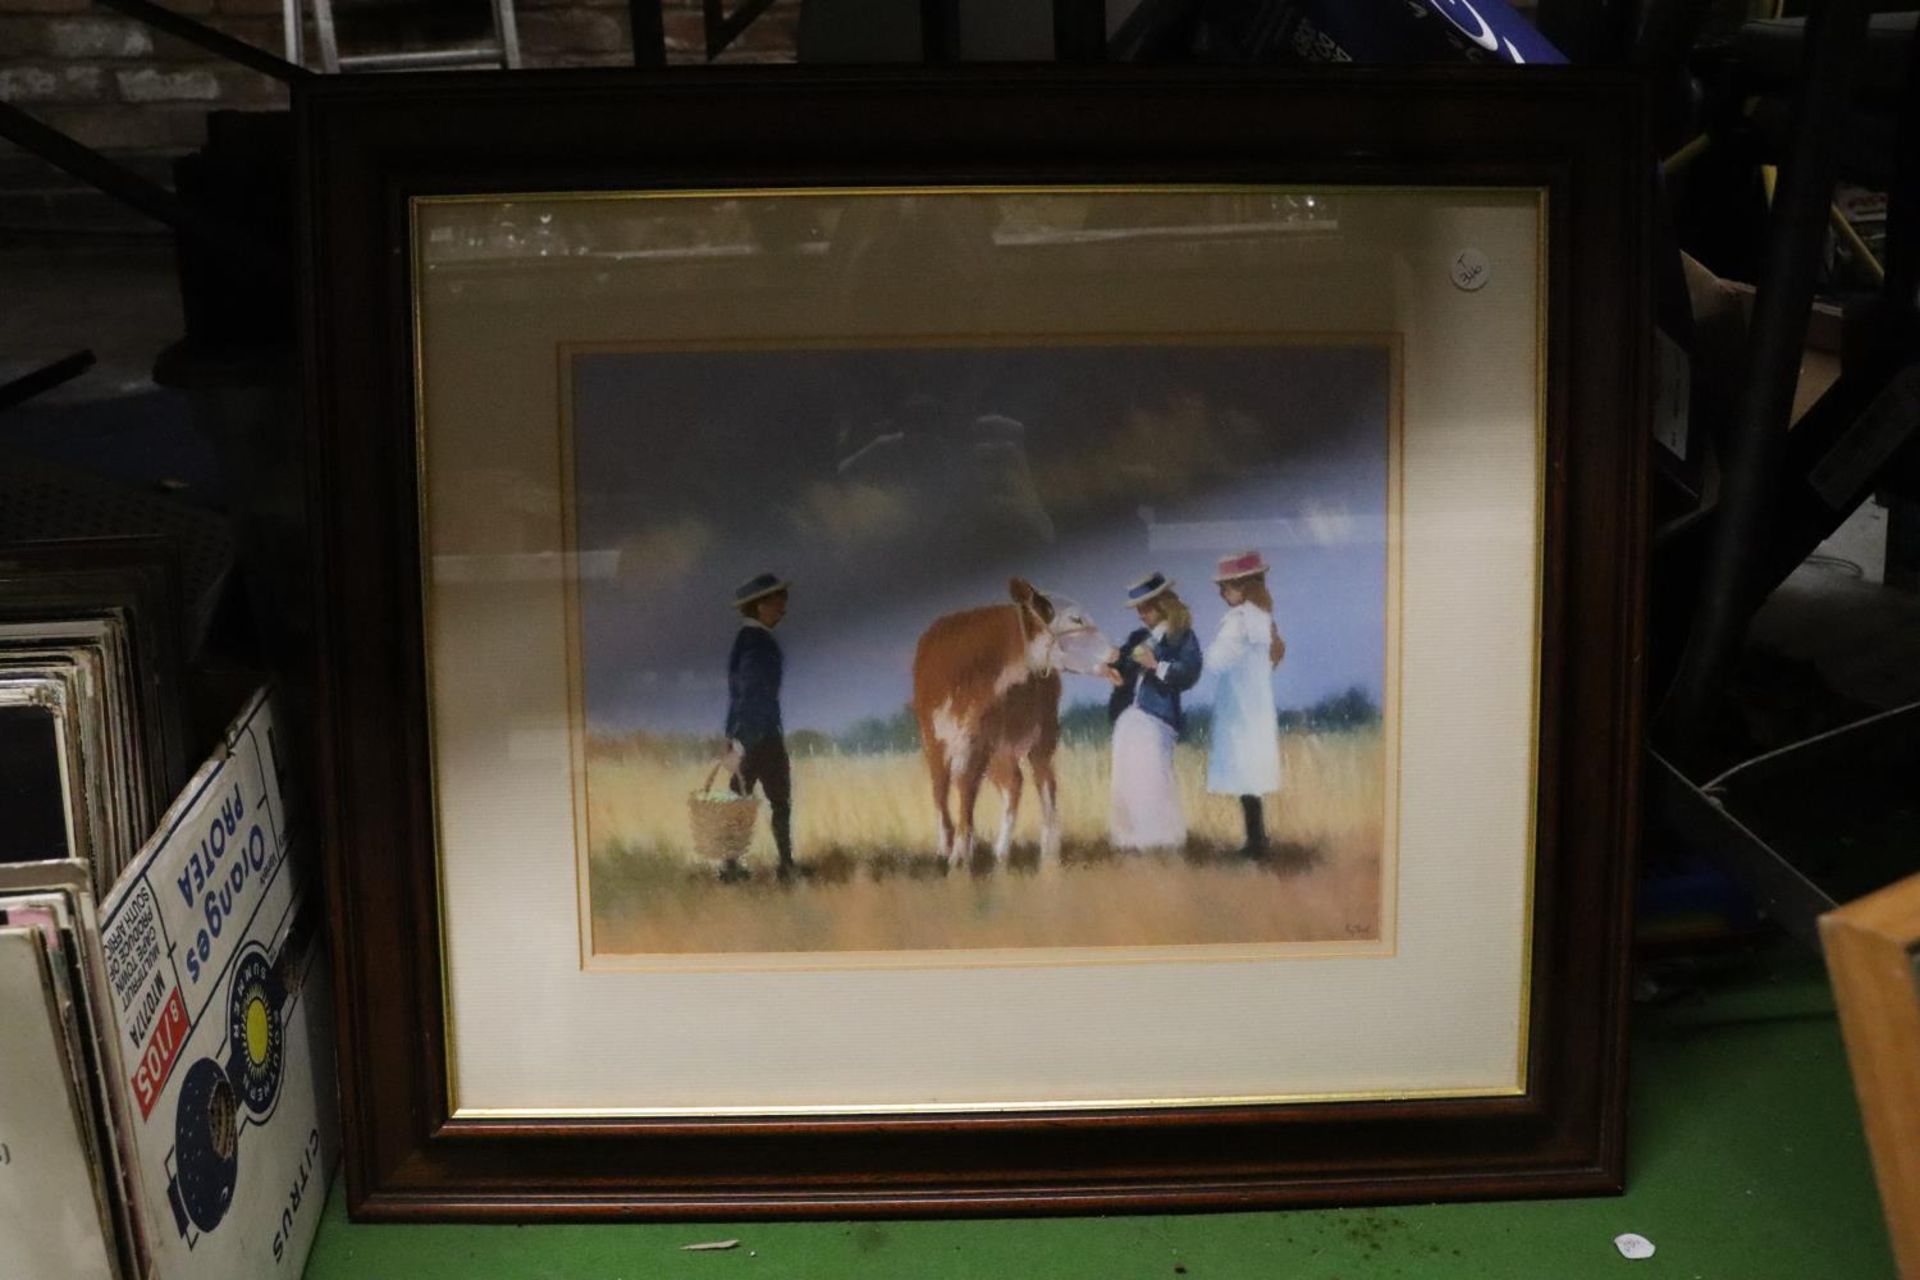 THREE FRAMED PRINTS TO INCLUDE A CALF WITH YOUNG GIRLS, A LAKE AND MOUNTAINS, ETC - Image 4 of 6